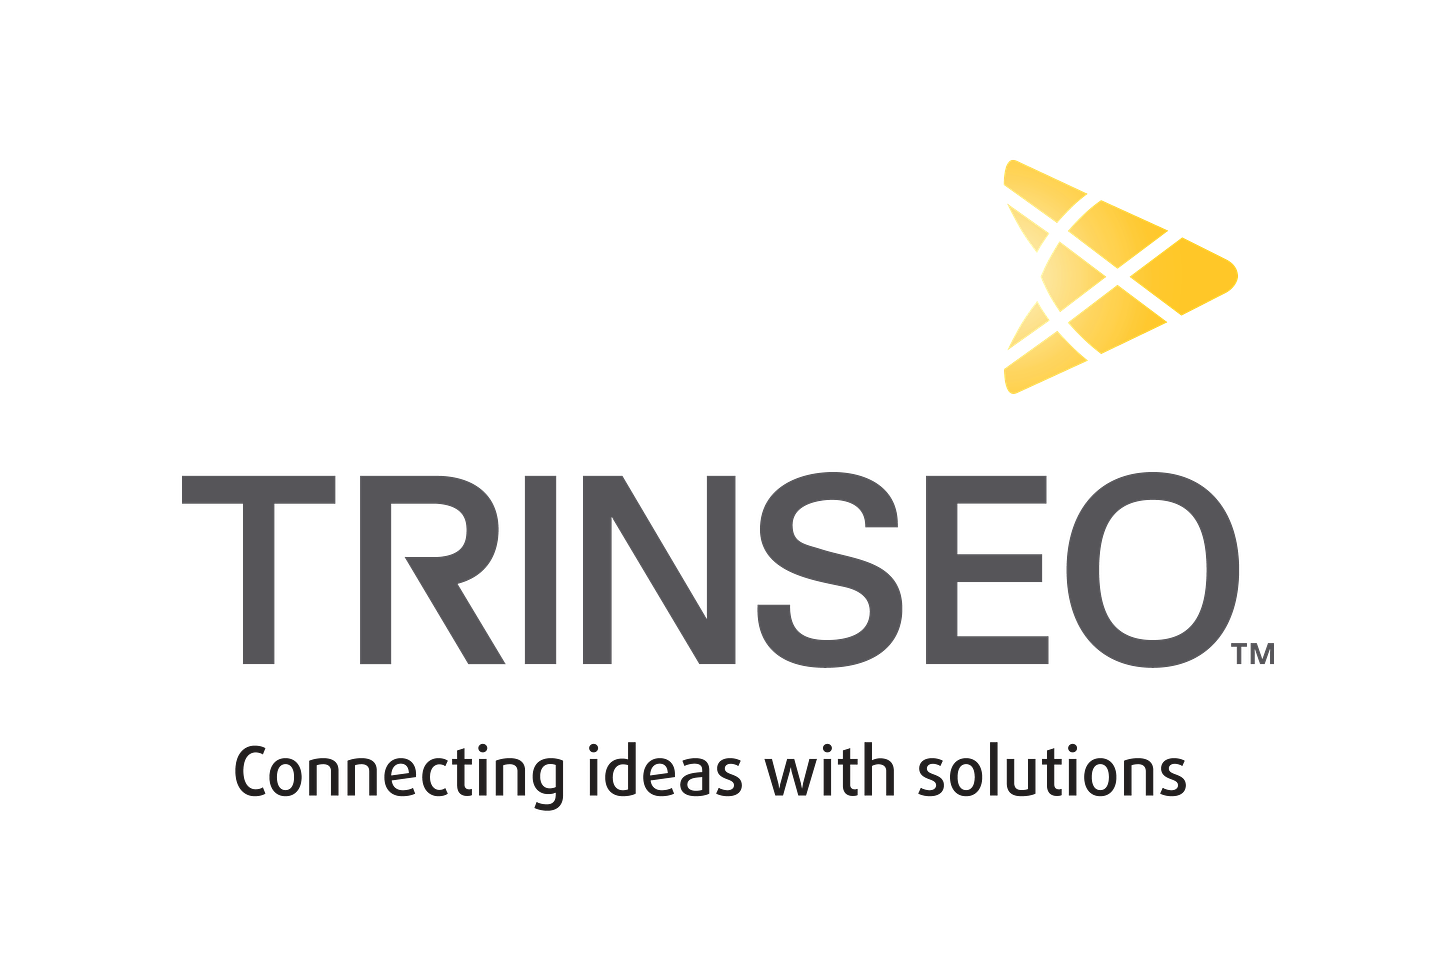 Trinseo logo in color with tagline